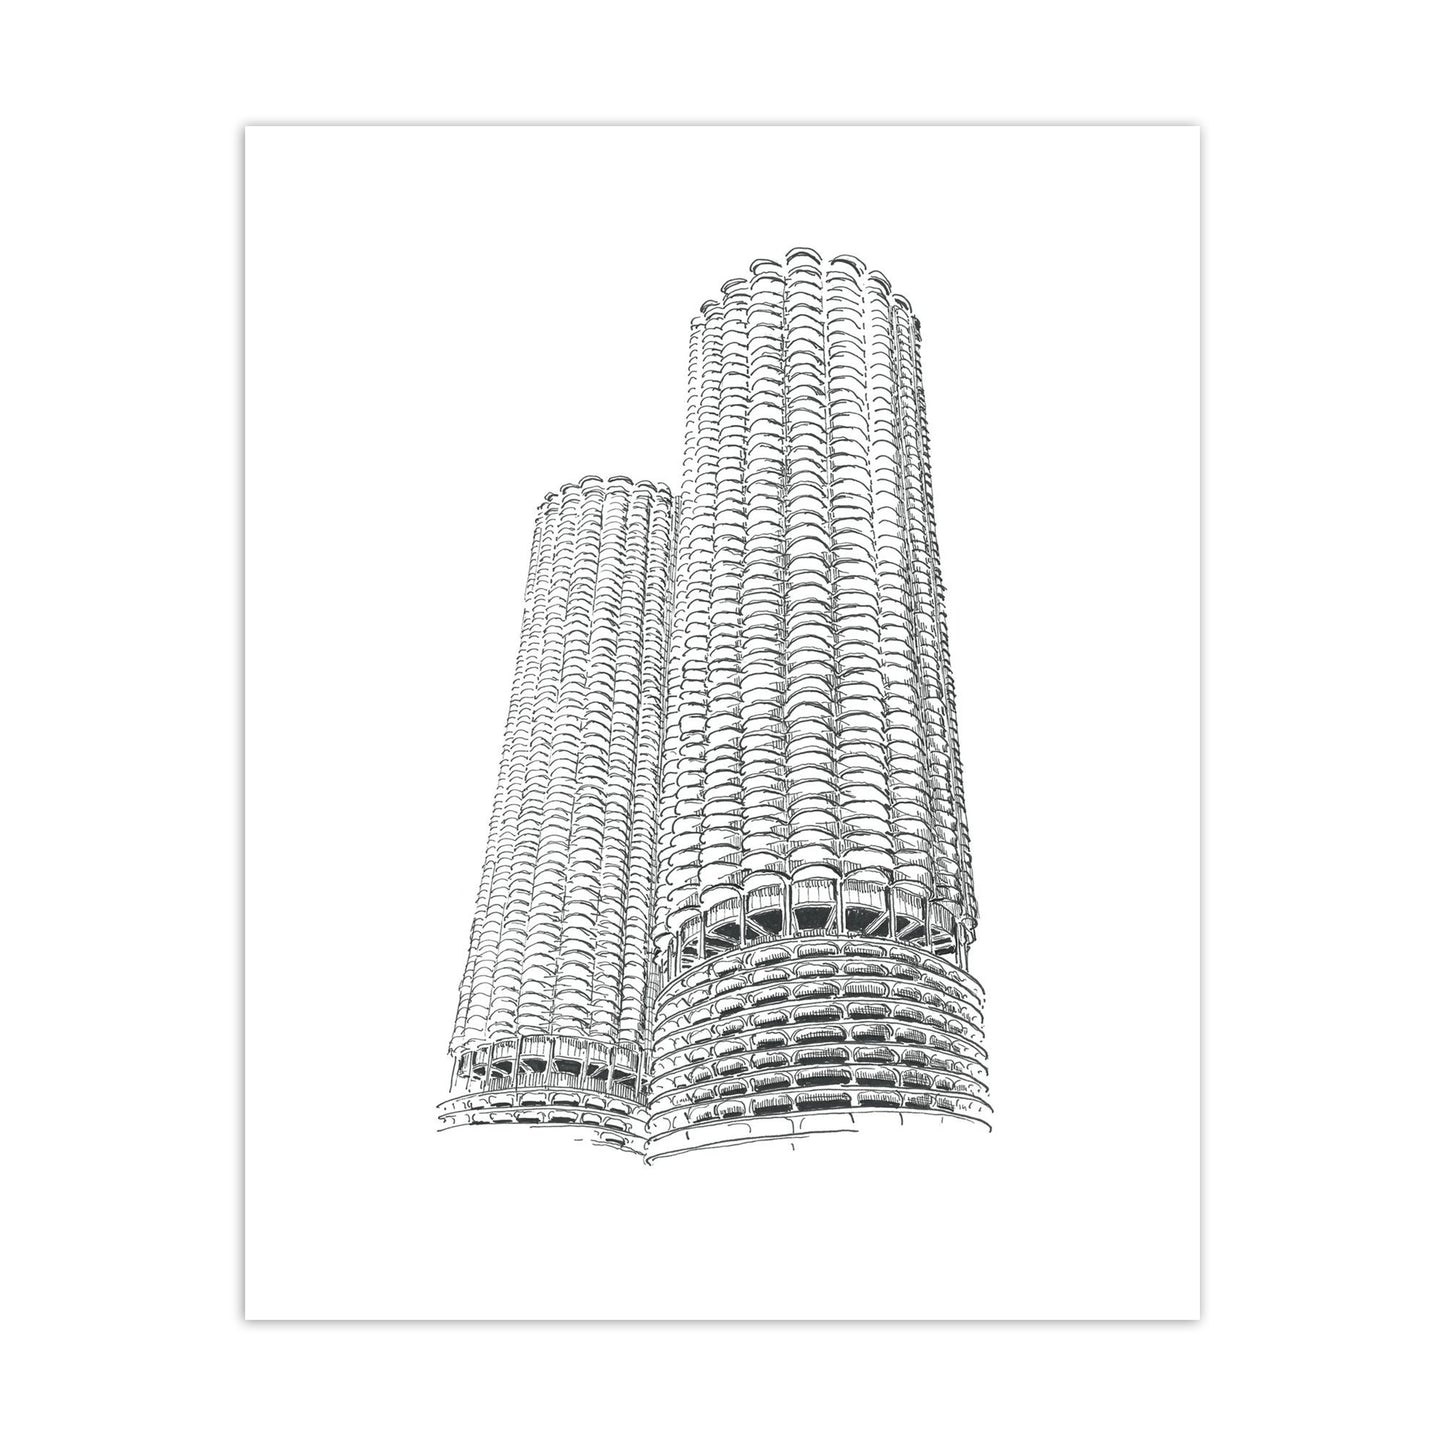 Chicago's Marina City Towers Buildings Illustrated 8" x 10" Print